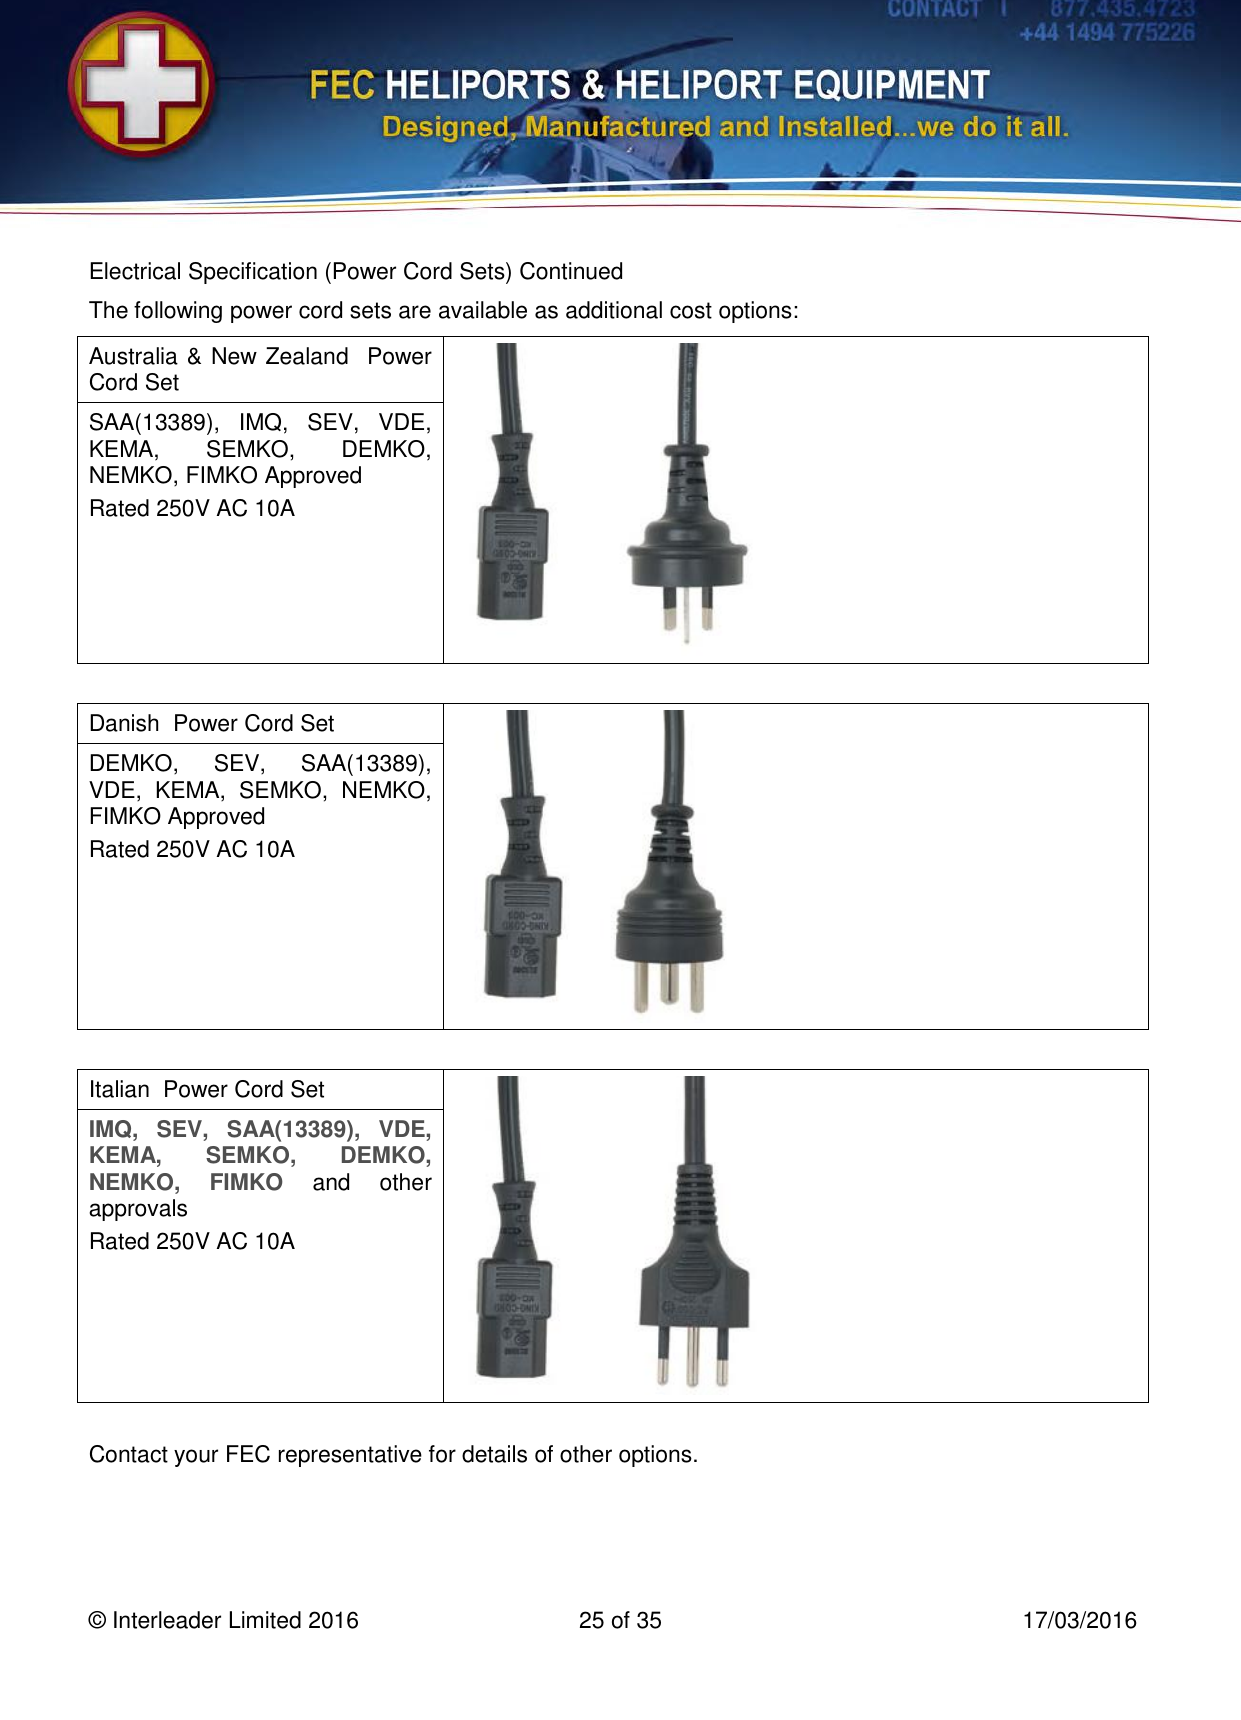   © Interleader Limited 2016  25 of 35  17/03/2016 Electrical Specification (Power Cord Sets) Continued The following power cord sets are available as additional cost options: Australia &amp; New Zealand  Power Cord Set  SAA(13389),  IMQ,  SEV,  VDE, KEMA,  SEMKO,  DEMKO, NEMKO, FIMKO Approved Rated 250V AC 10A   Danish  Power Cord Set  DEMKO,  SEV,  SAA(13389), VDE,  KEMA,  SEMKO,  NEMKO, FIMKO Approved Rated 250V AC 10A   Italian  Power Cord Set  IMQ,  SEV,  SAA(13389),  VDE, KEMA,  SEMKO,  DEMKO, NEMKO,  FIMKO  and  other approvals Rated 250V AC 10A   Contact your FEC representative for details of other options.   